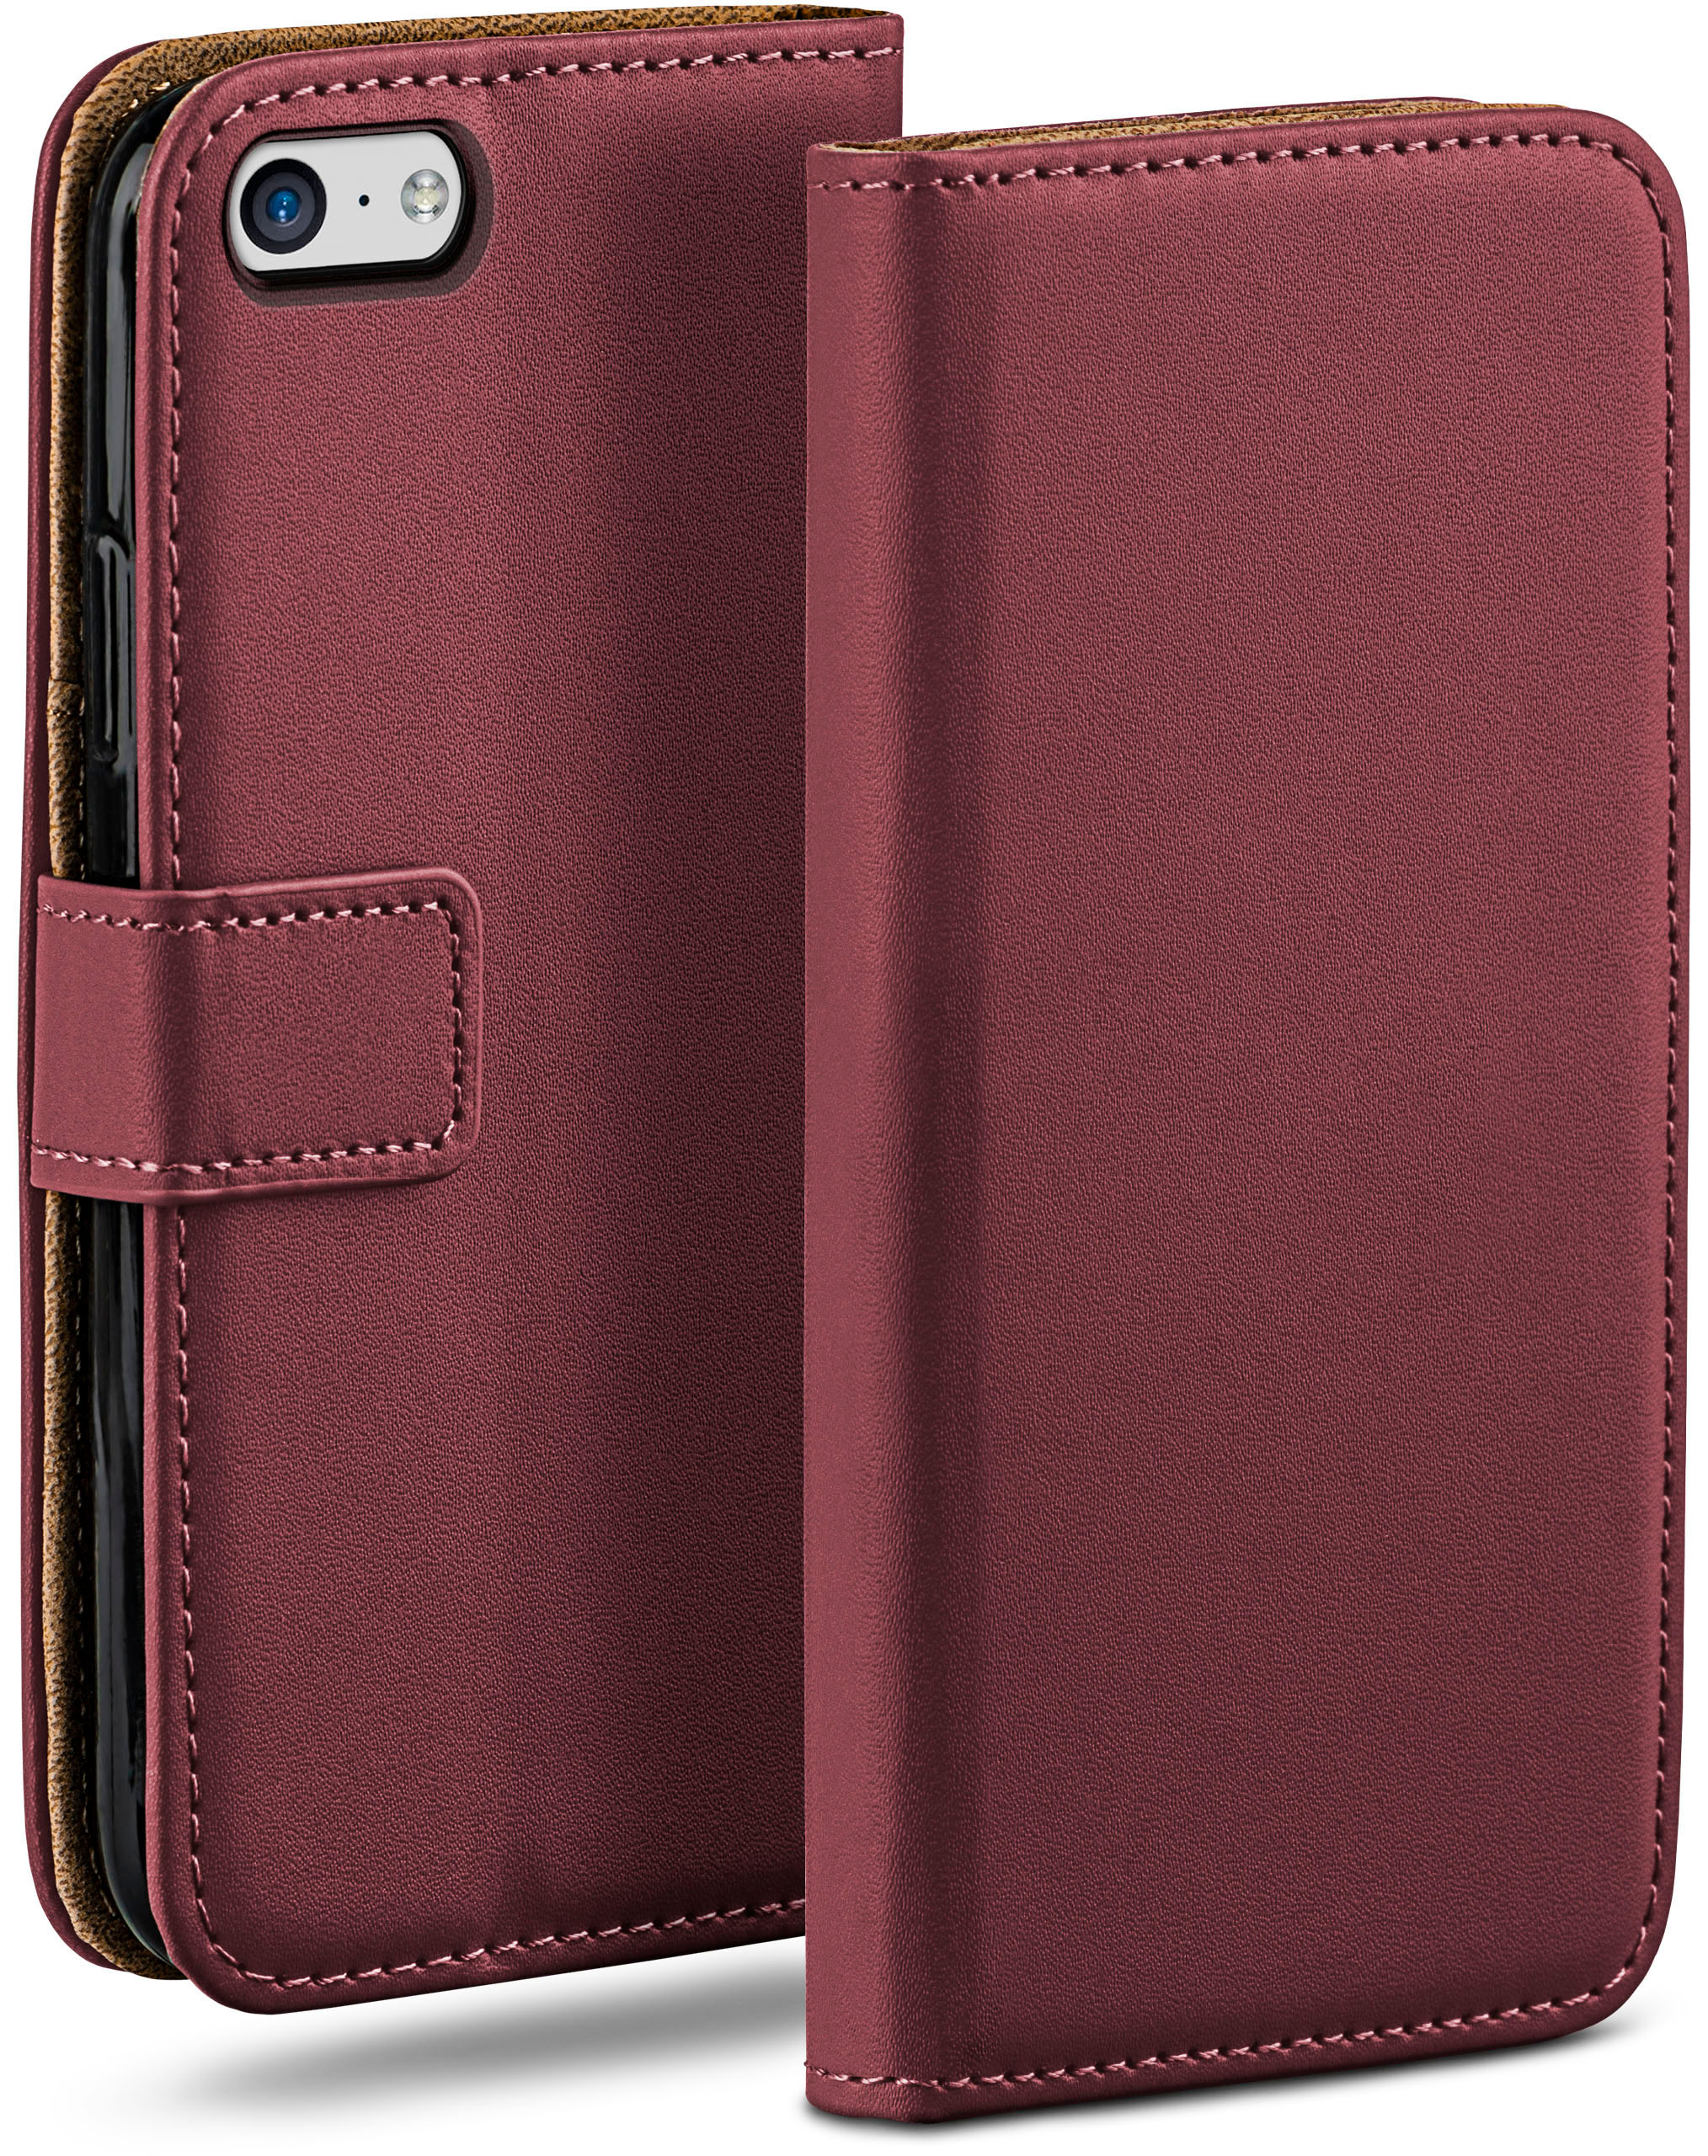 MOEX Book Case, Bookcover, Maroon-Red iPhone 5c, Apple